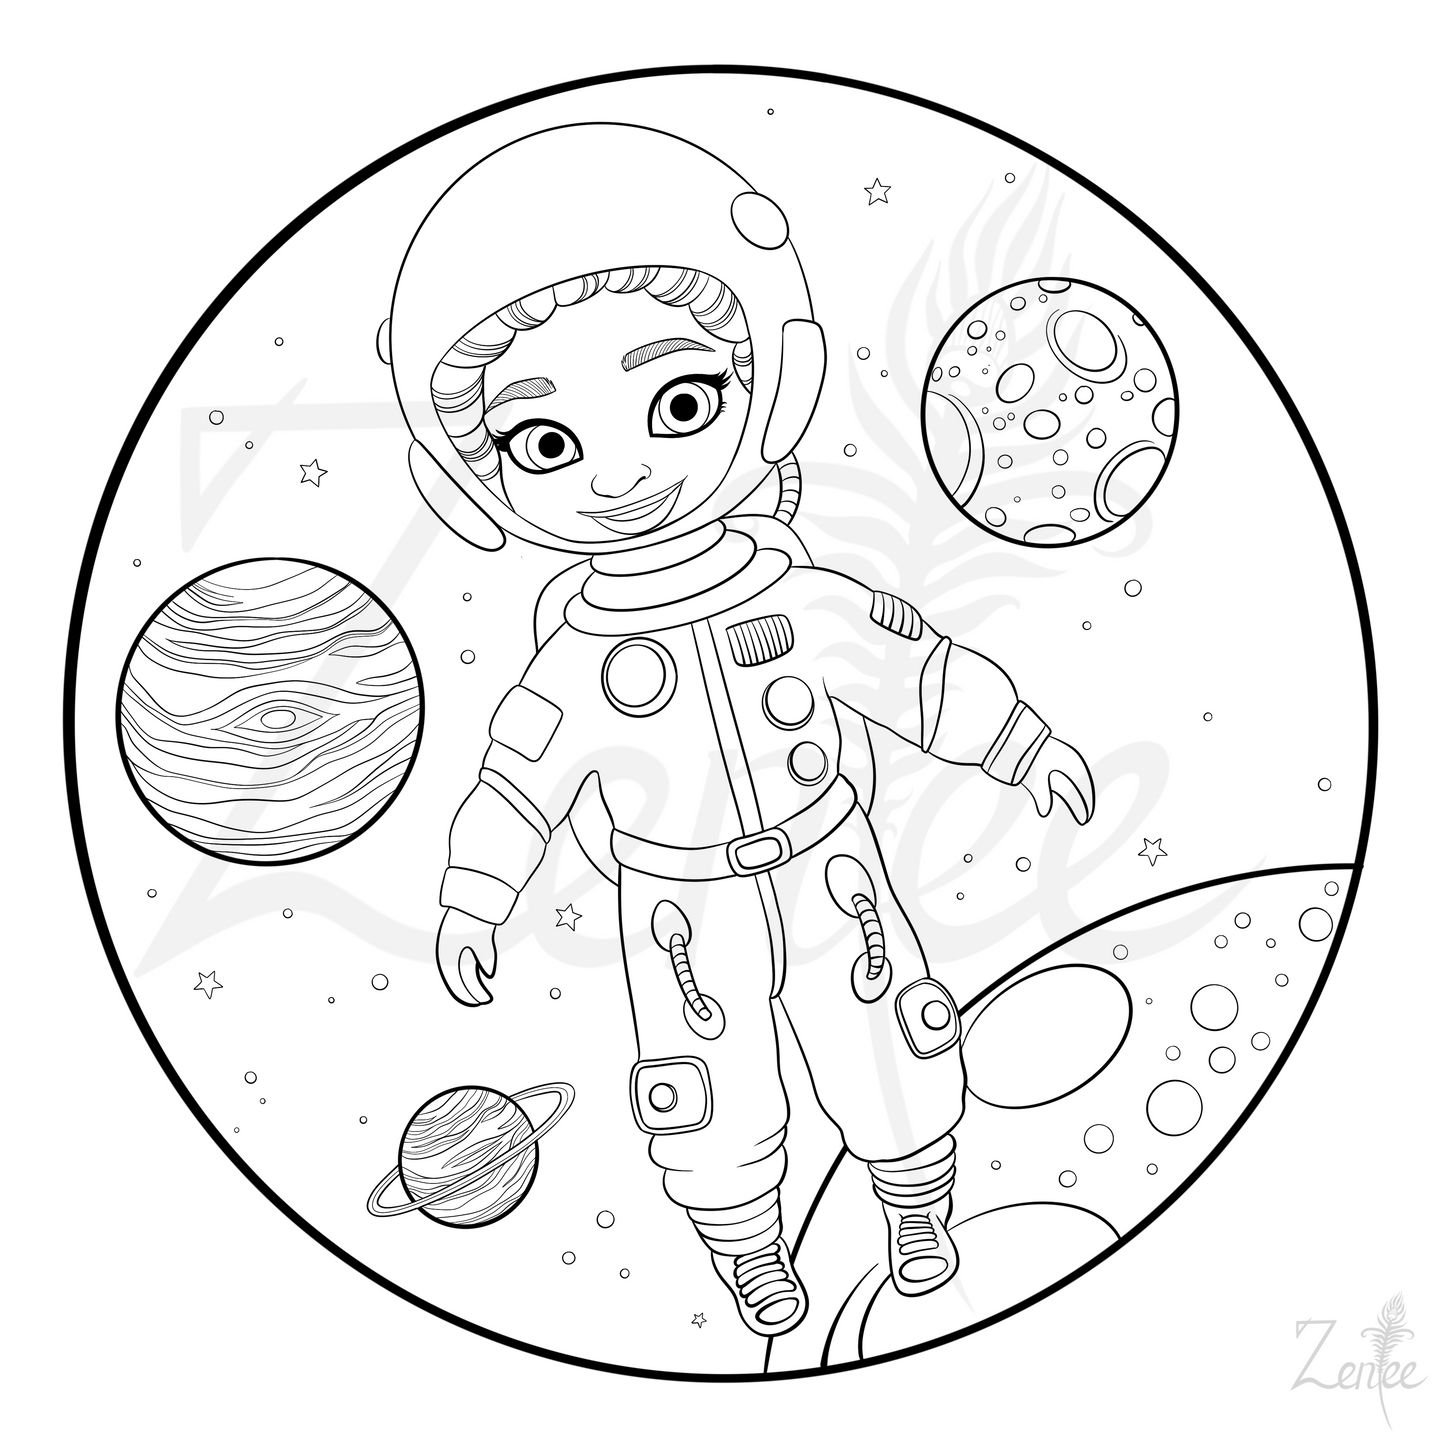 Alphabet Book: Ava the Astronaut - Coloring Page